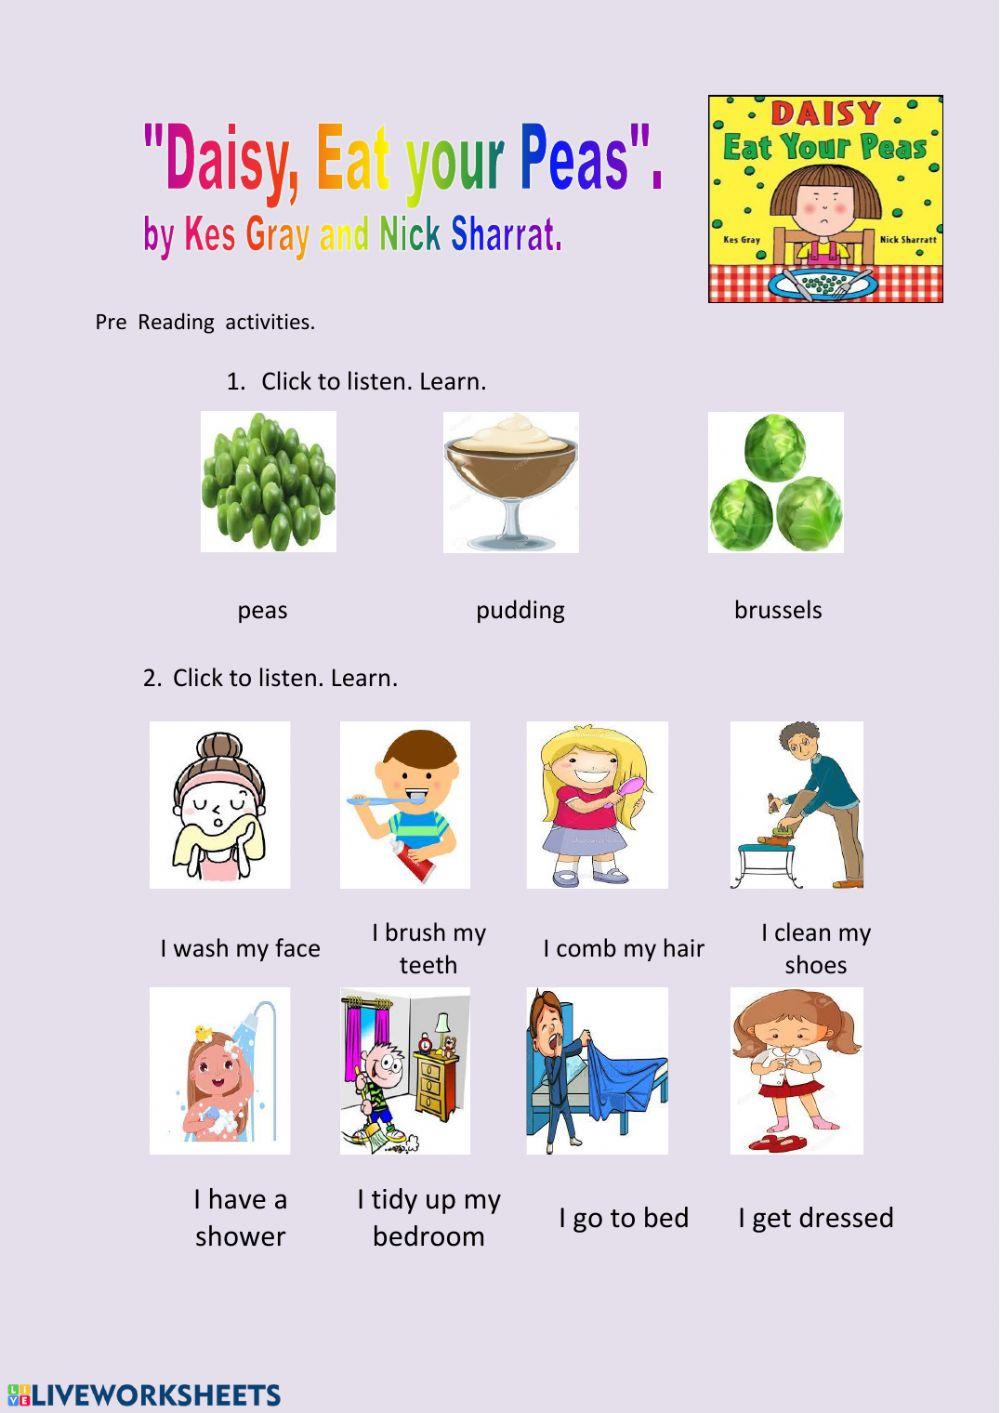 Pre Reading Worksheet Daisy Eat your Peas